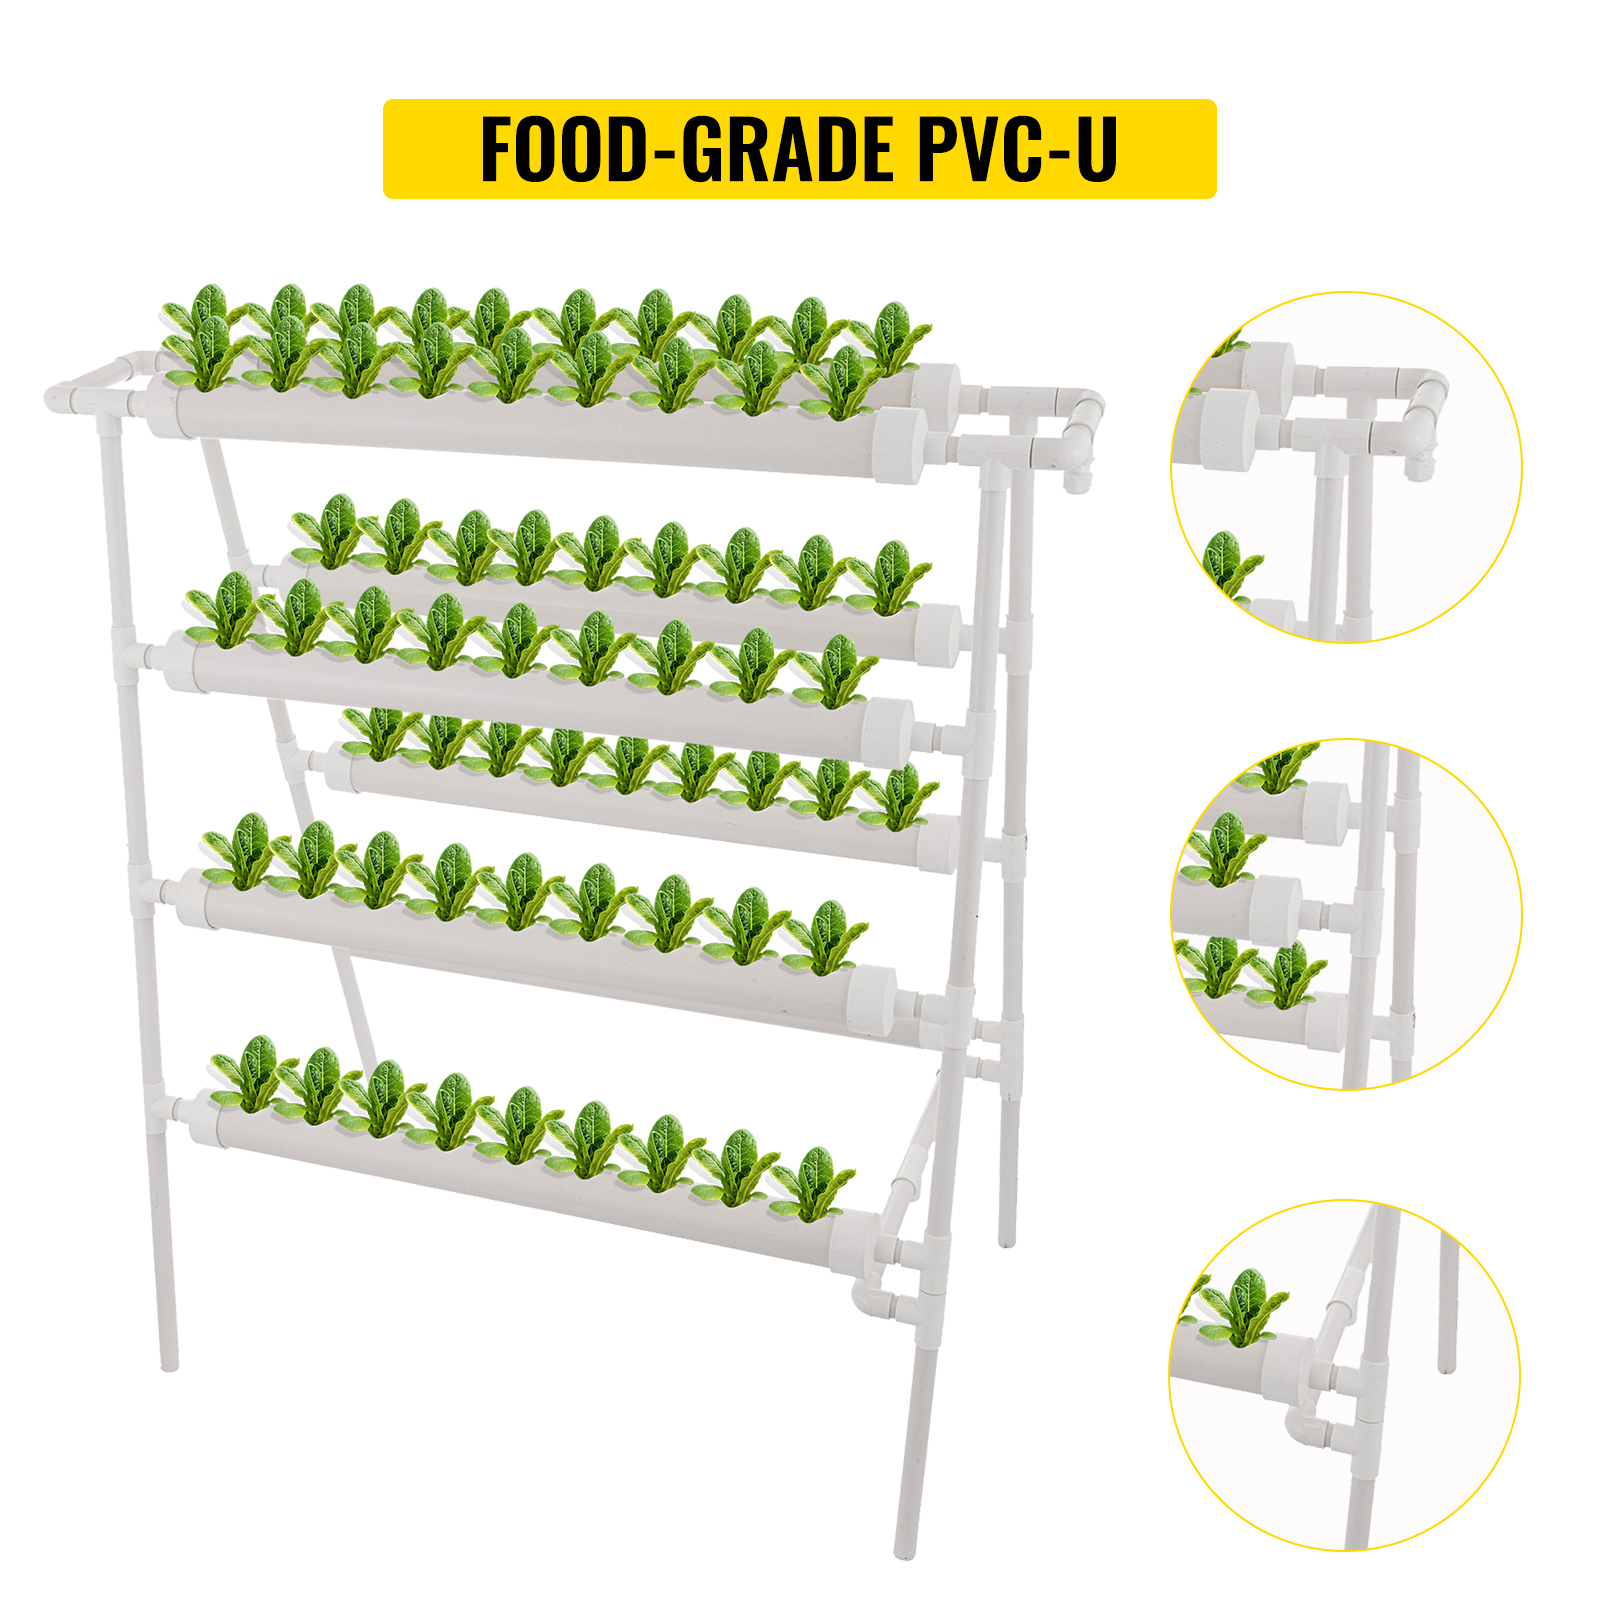 Hydroponic Site Grow Kit 72 Sites Ladder-type Plant System Vegetable Garden Tool 